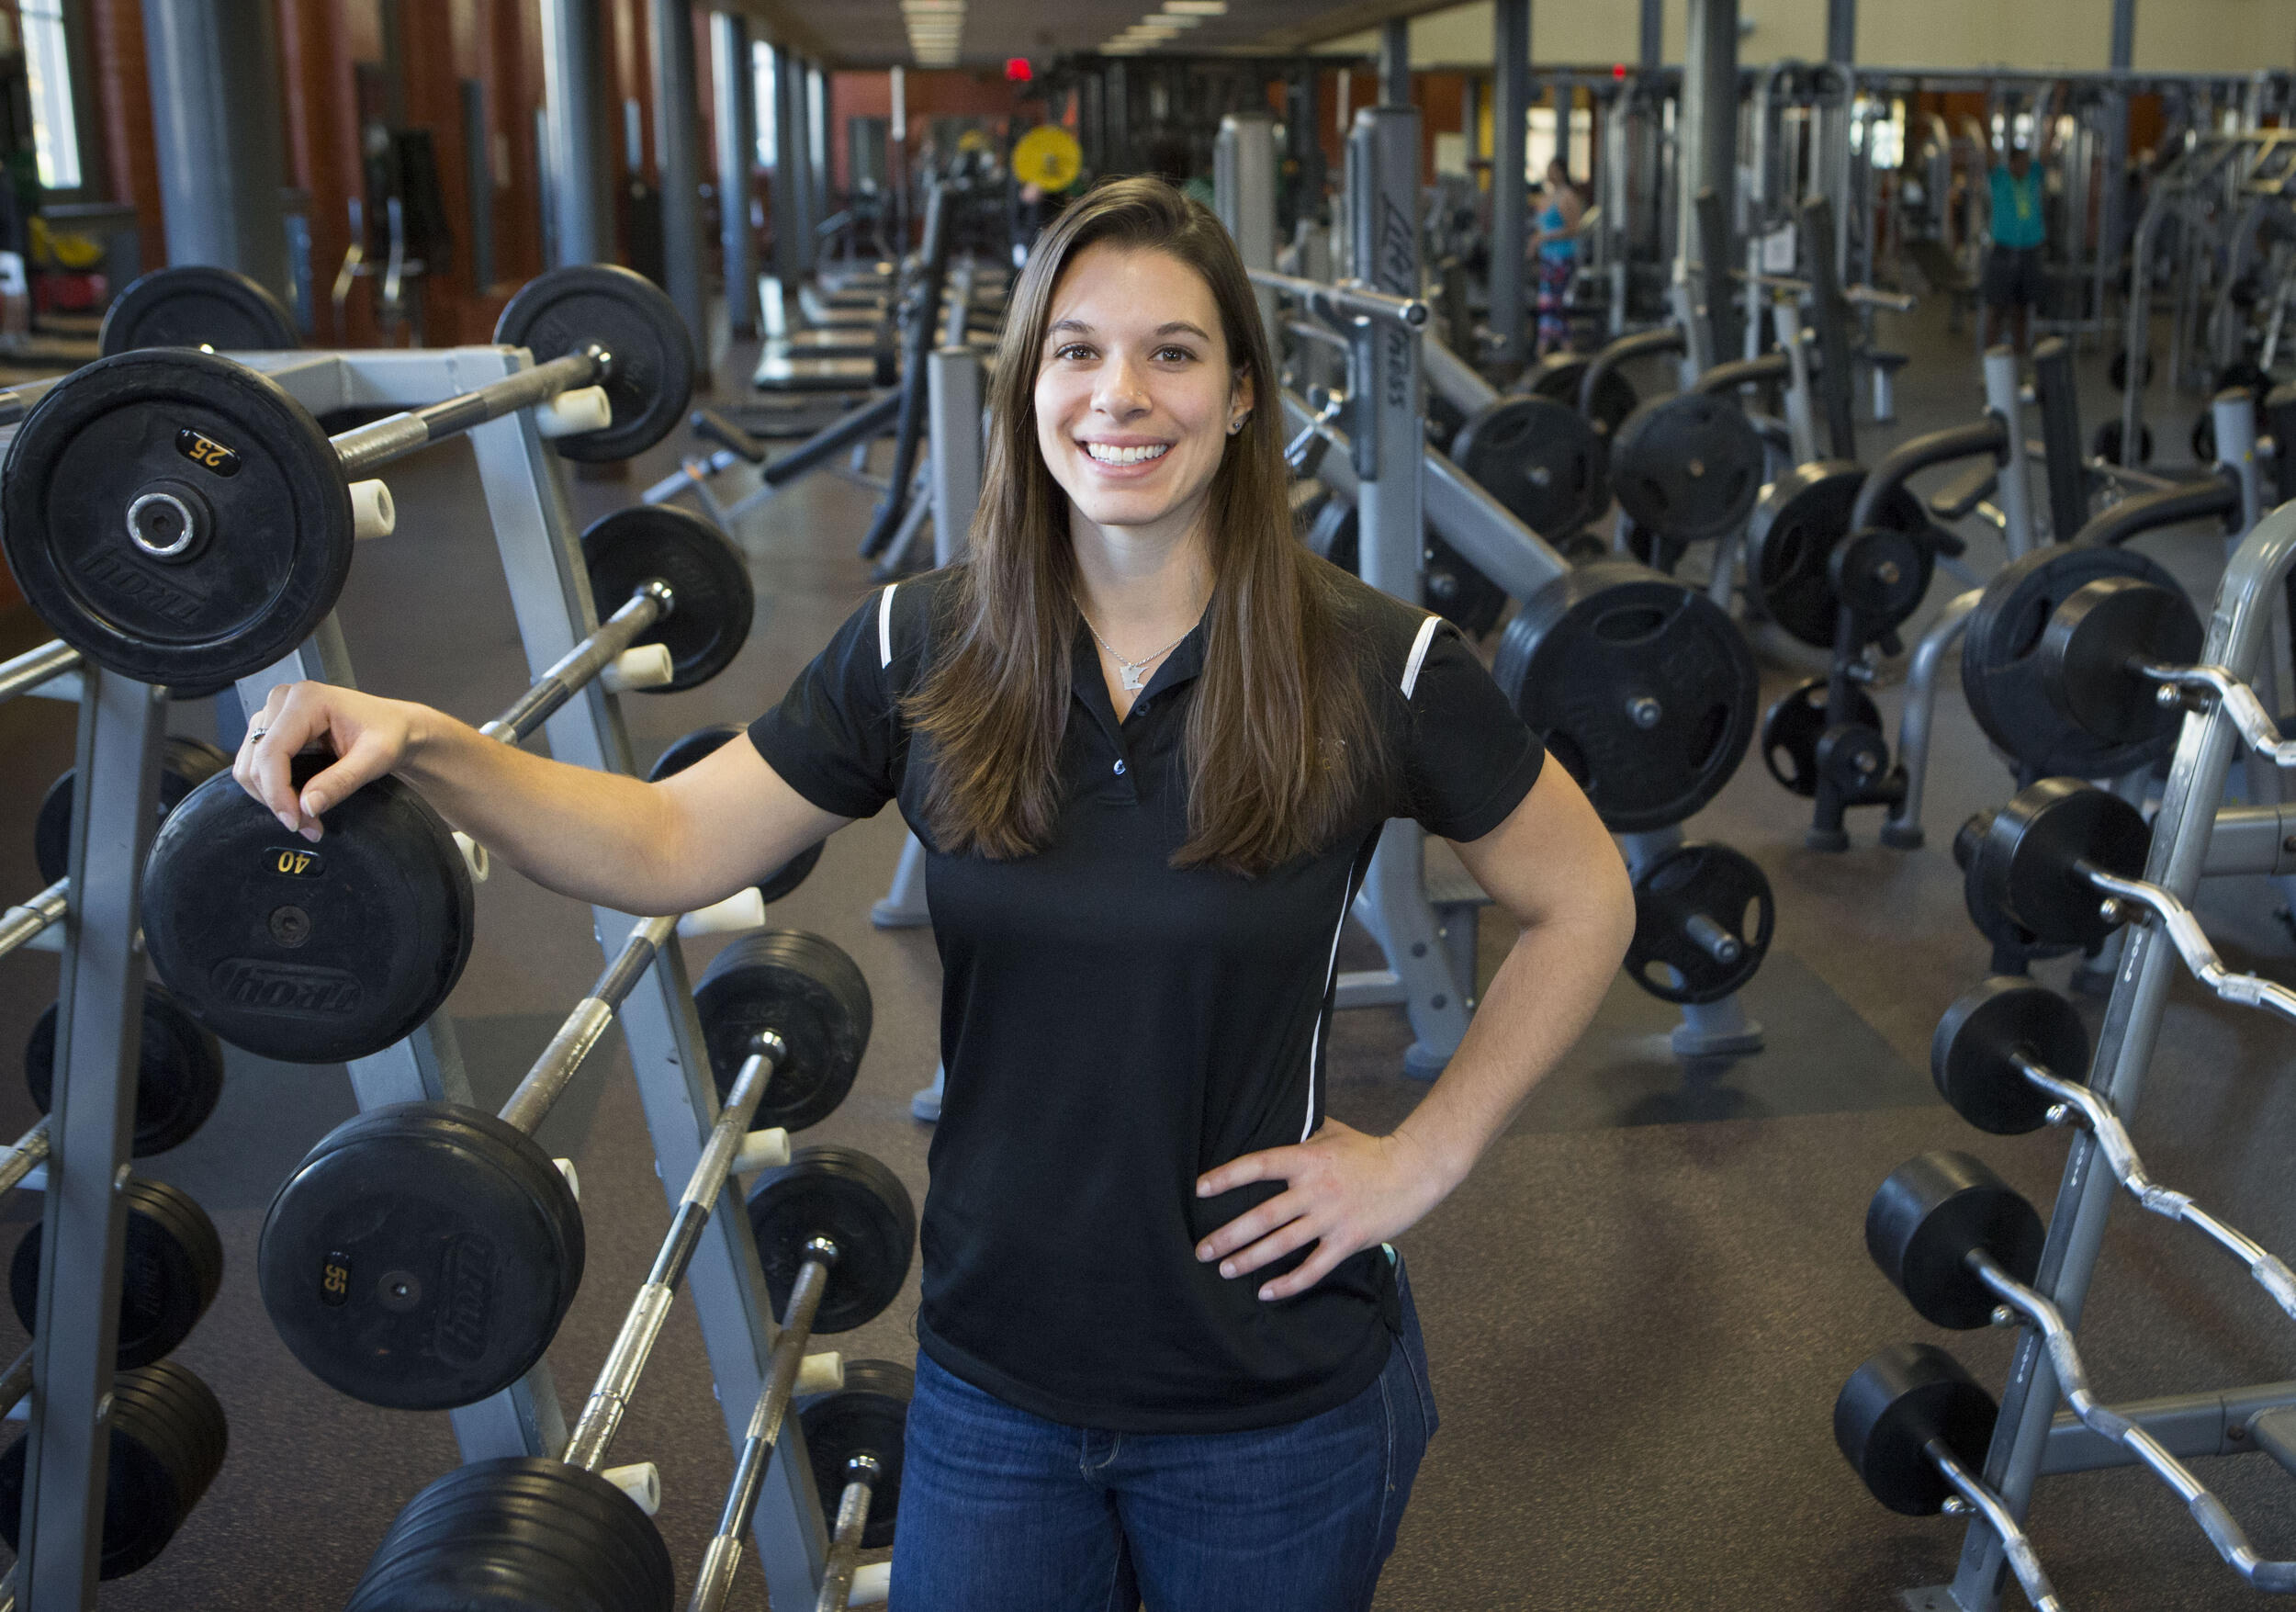 Nikki Stock was a group exercise instructor and personal trainer as an undergraduate student at the University of Minnesota. There, she fell in love with fitness and working in recreation. “It's always changing, it's never the same every day,” she said of campus rec centers like Cary Street Gym. (Julia Rendleman, University Marketing)